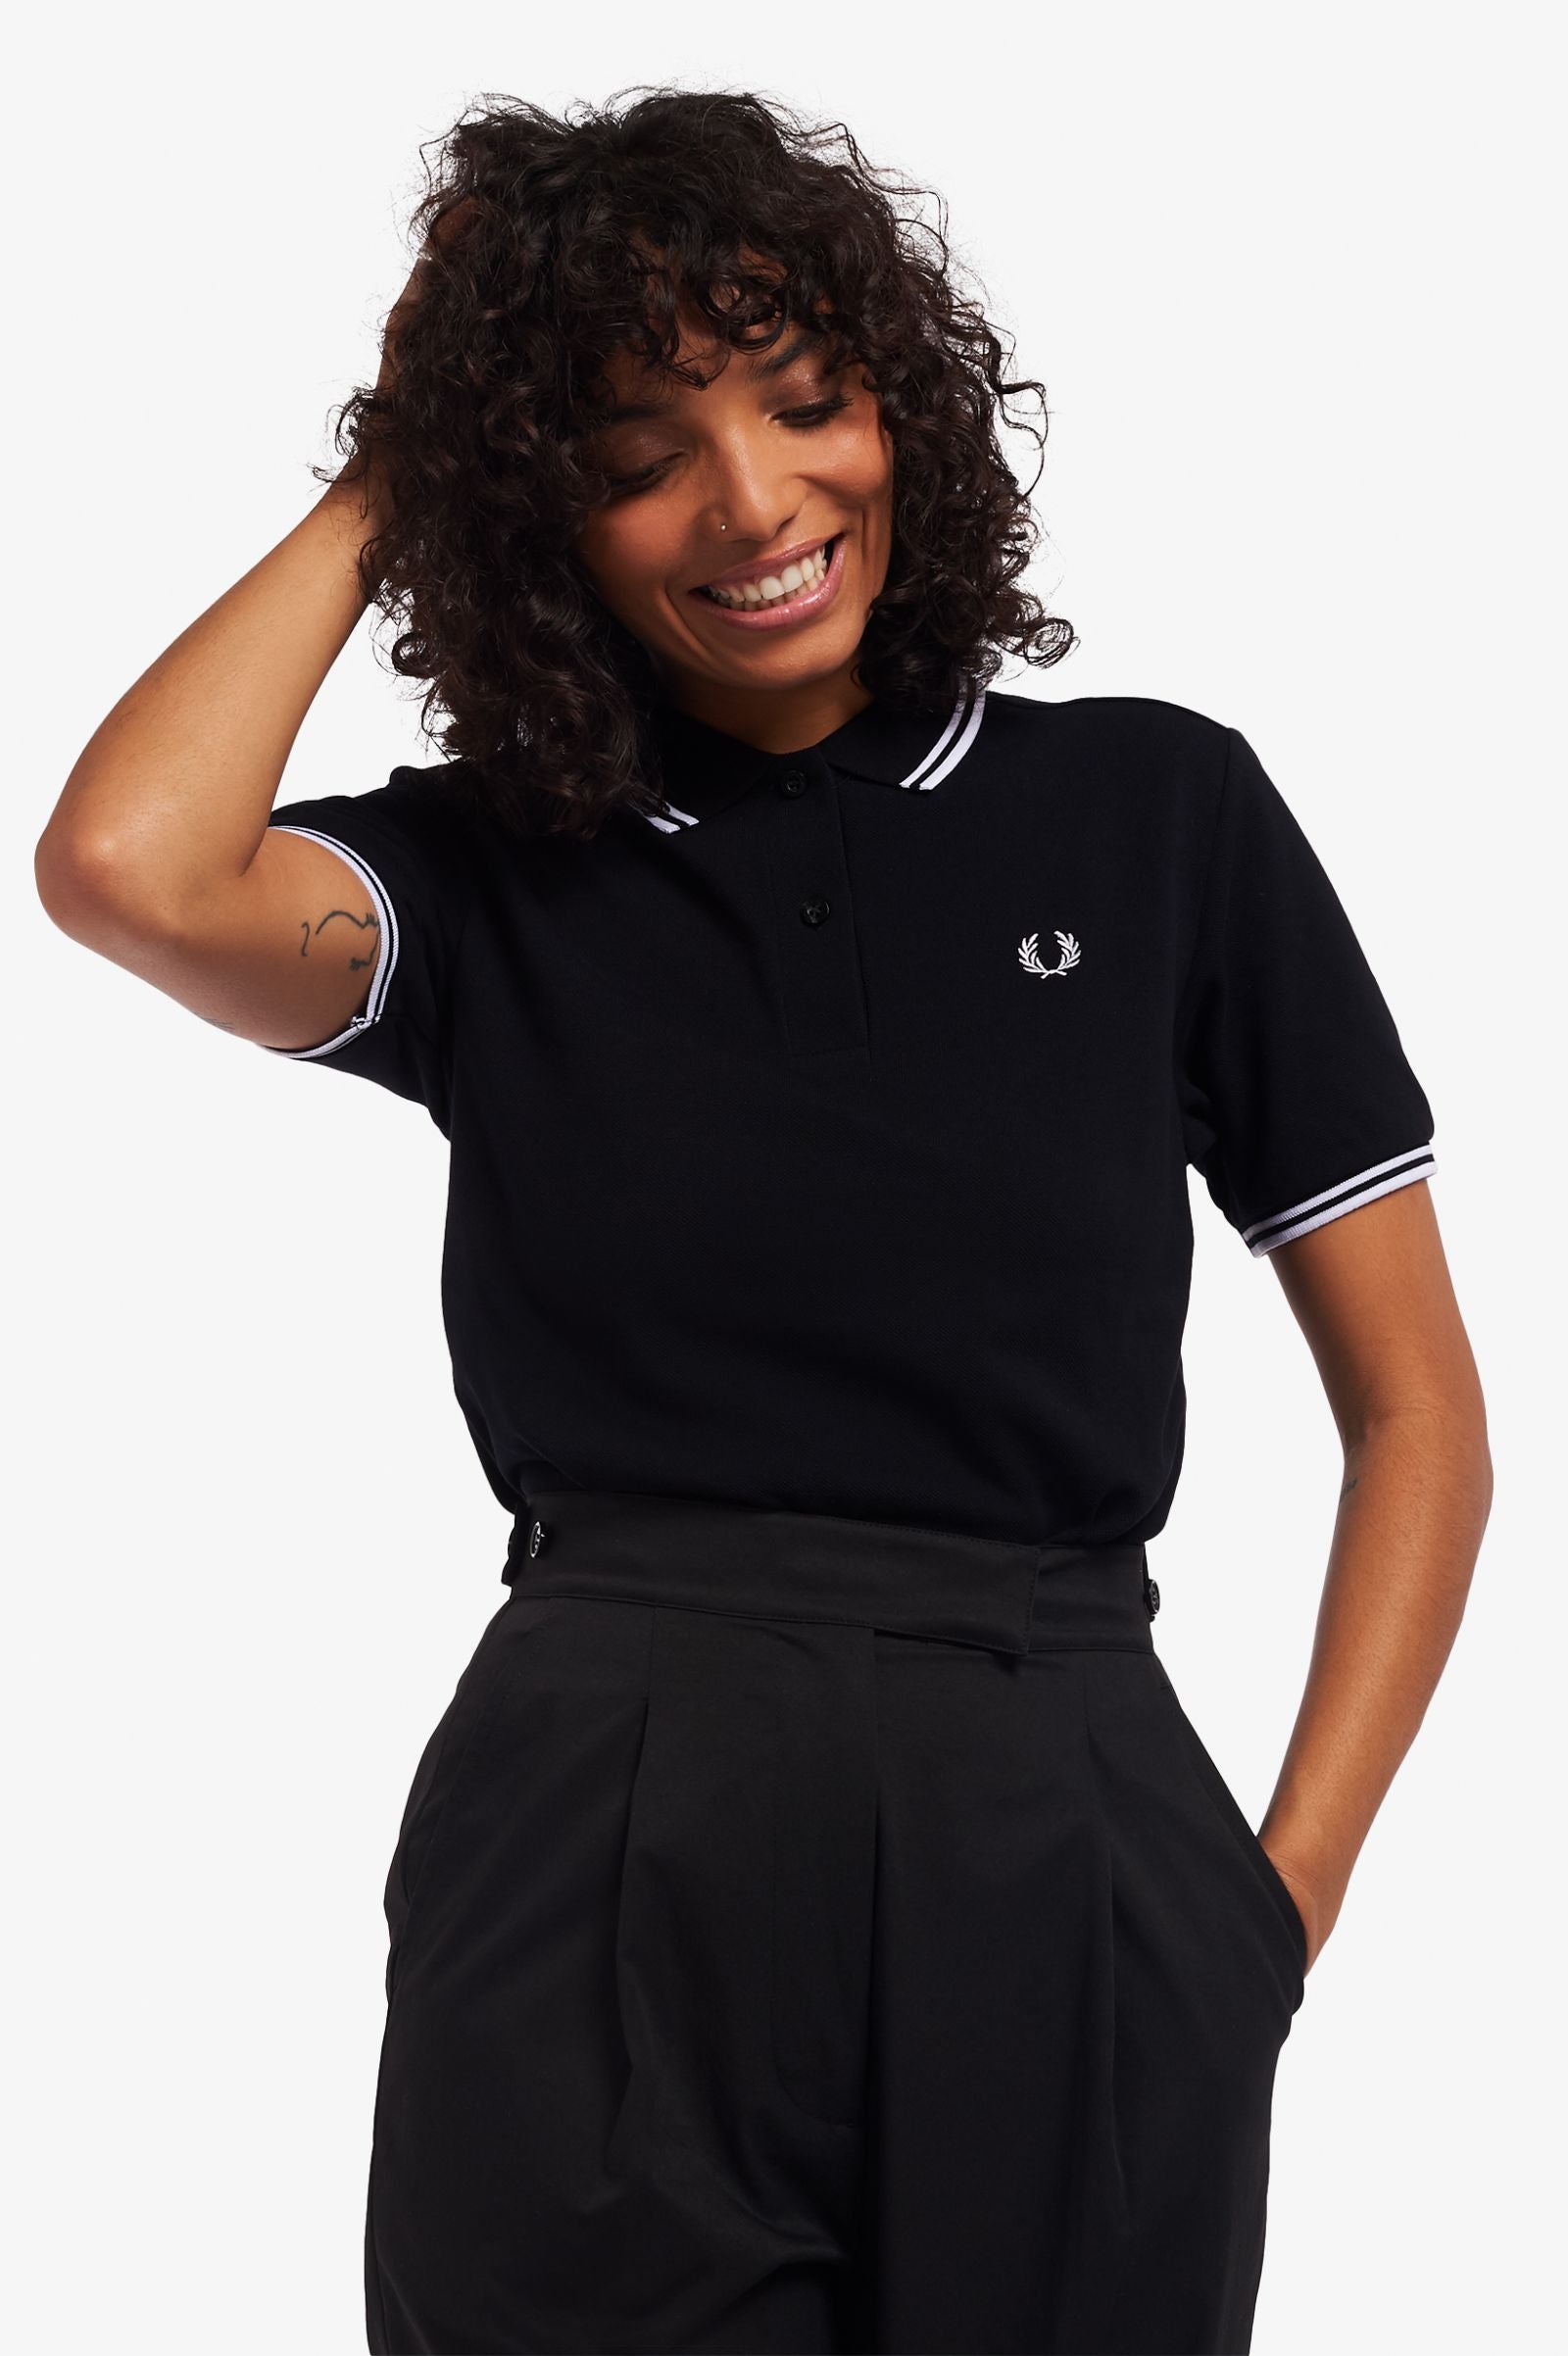 Ladies Black/White Twin Tipped Fred Perry Shirt